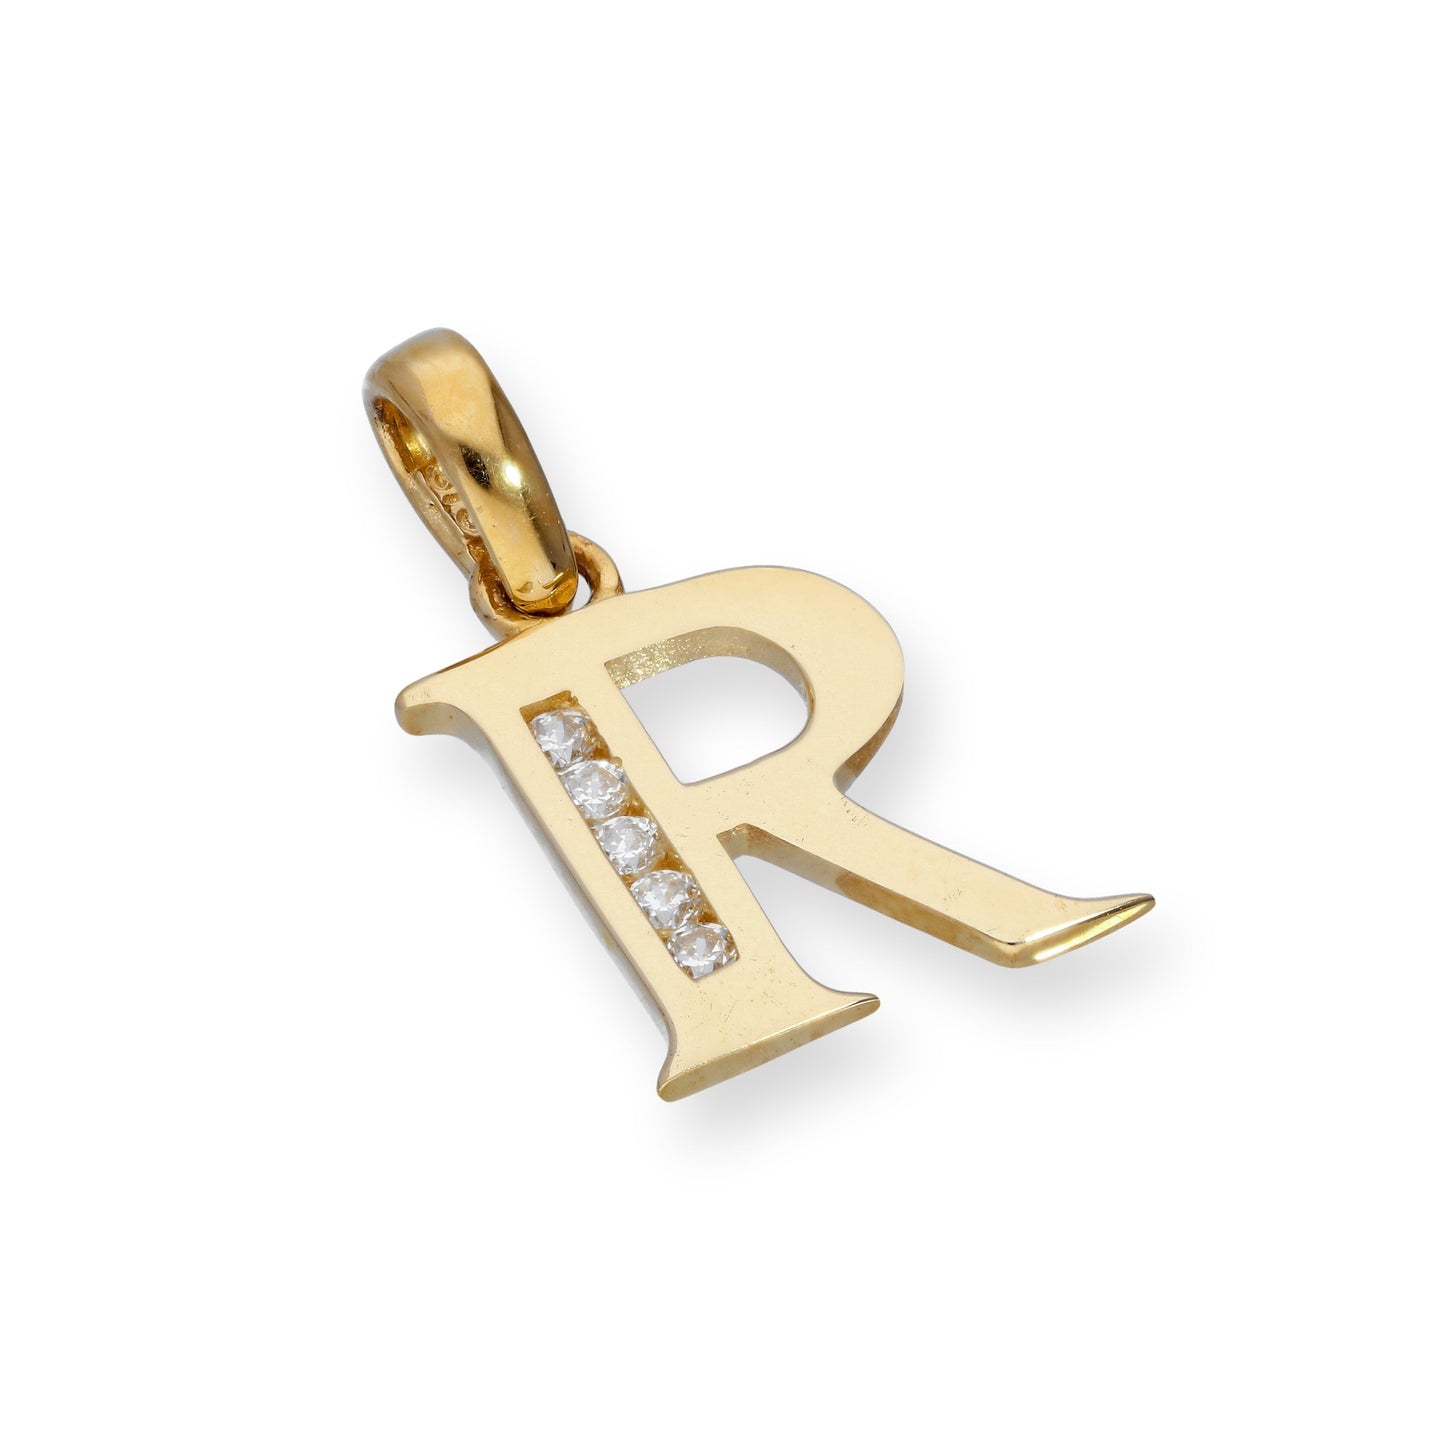 9ct Gold & Clear CZ Crystal Hanging Alphabet Letter Charm A-Z